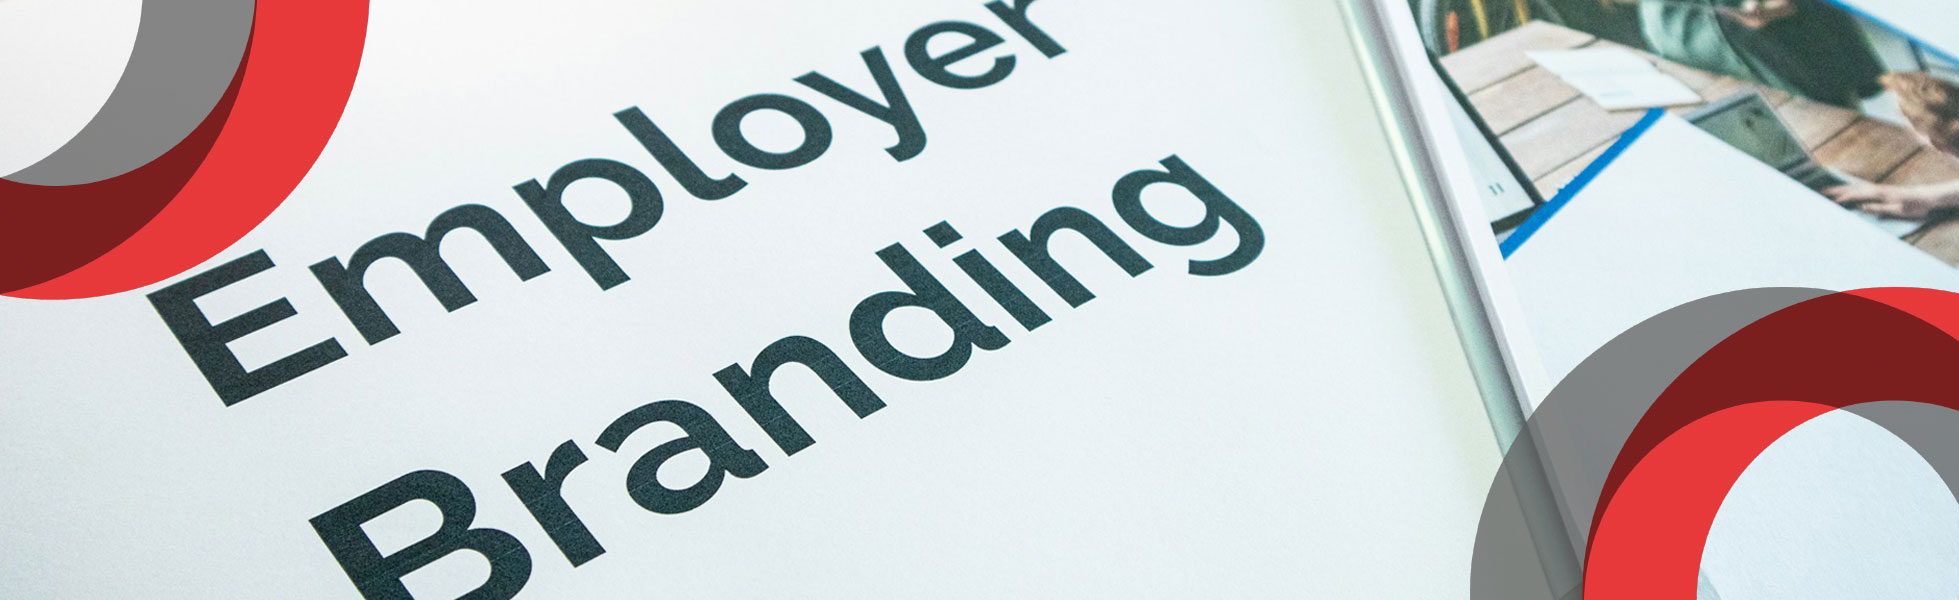 Attract and retain talent through employer branding